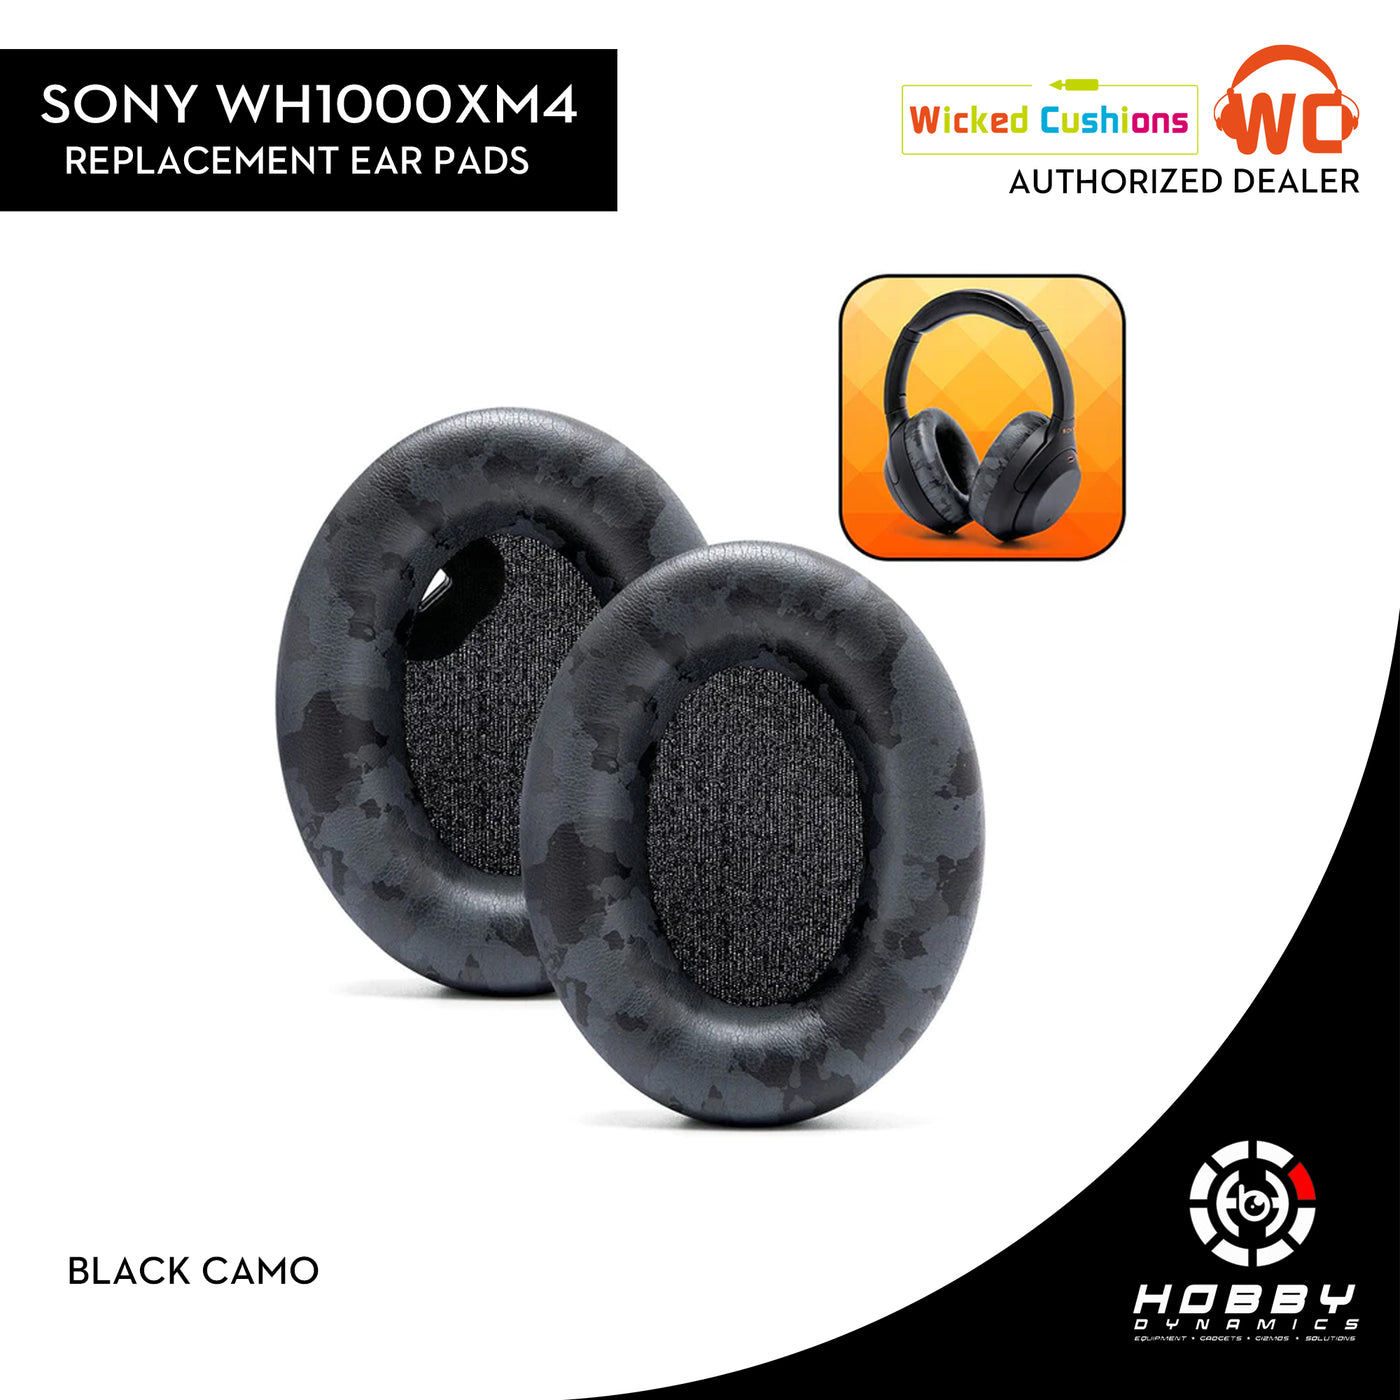 Wicked Cushions Replacement Ear Pads For Sony WH1000XM4 Over-Ear Headphones